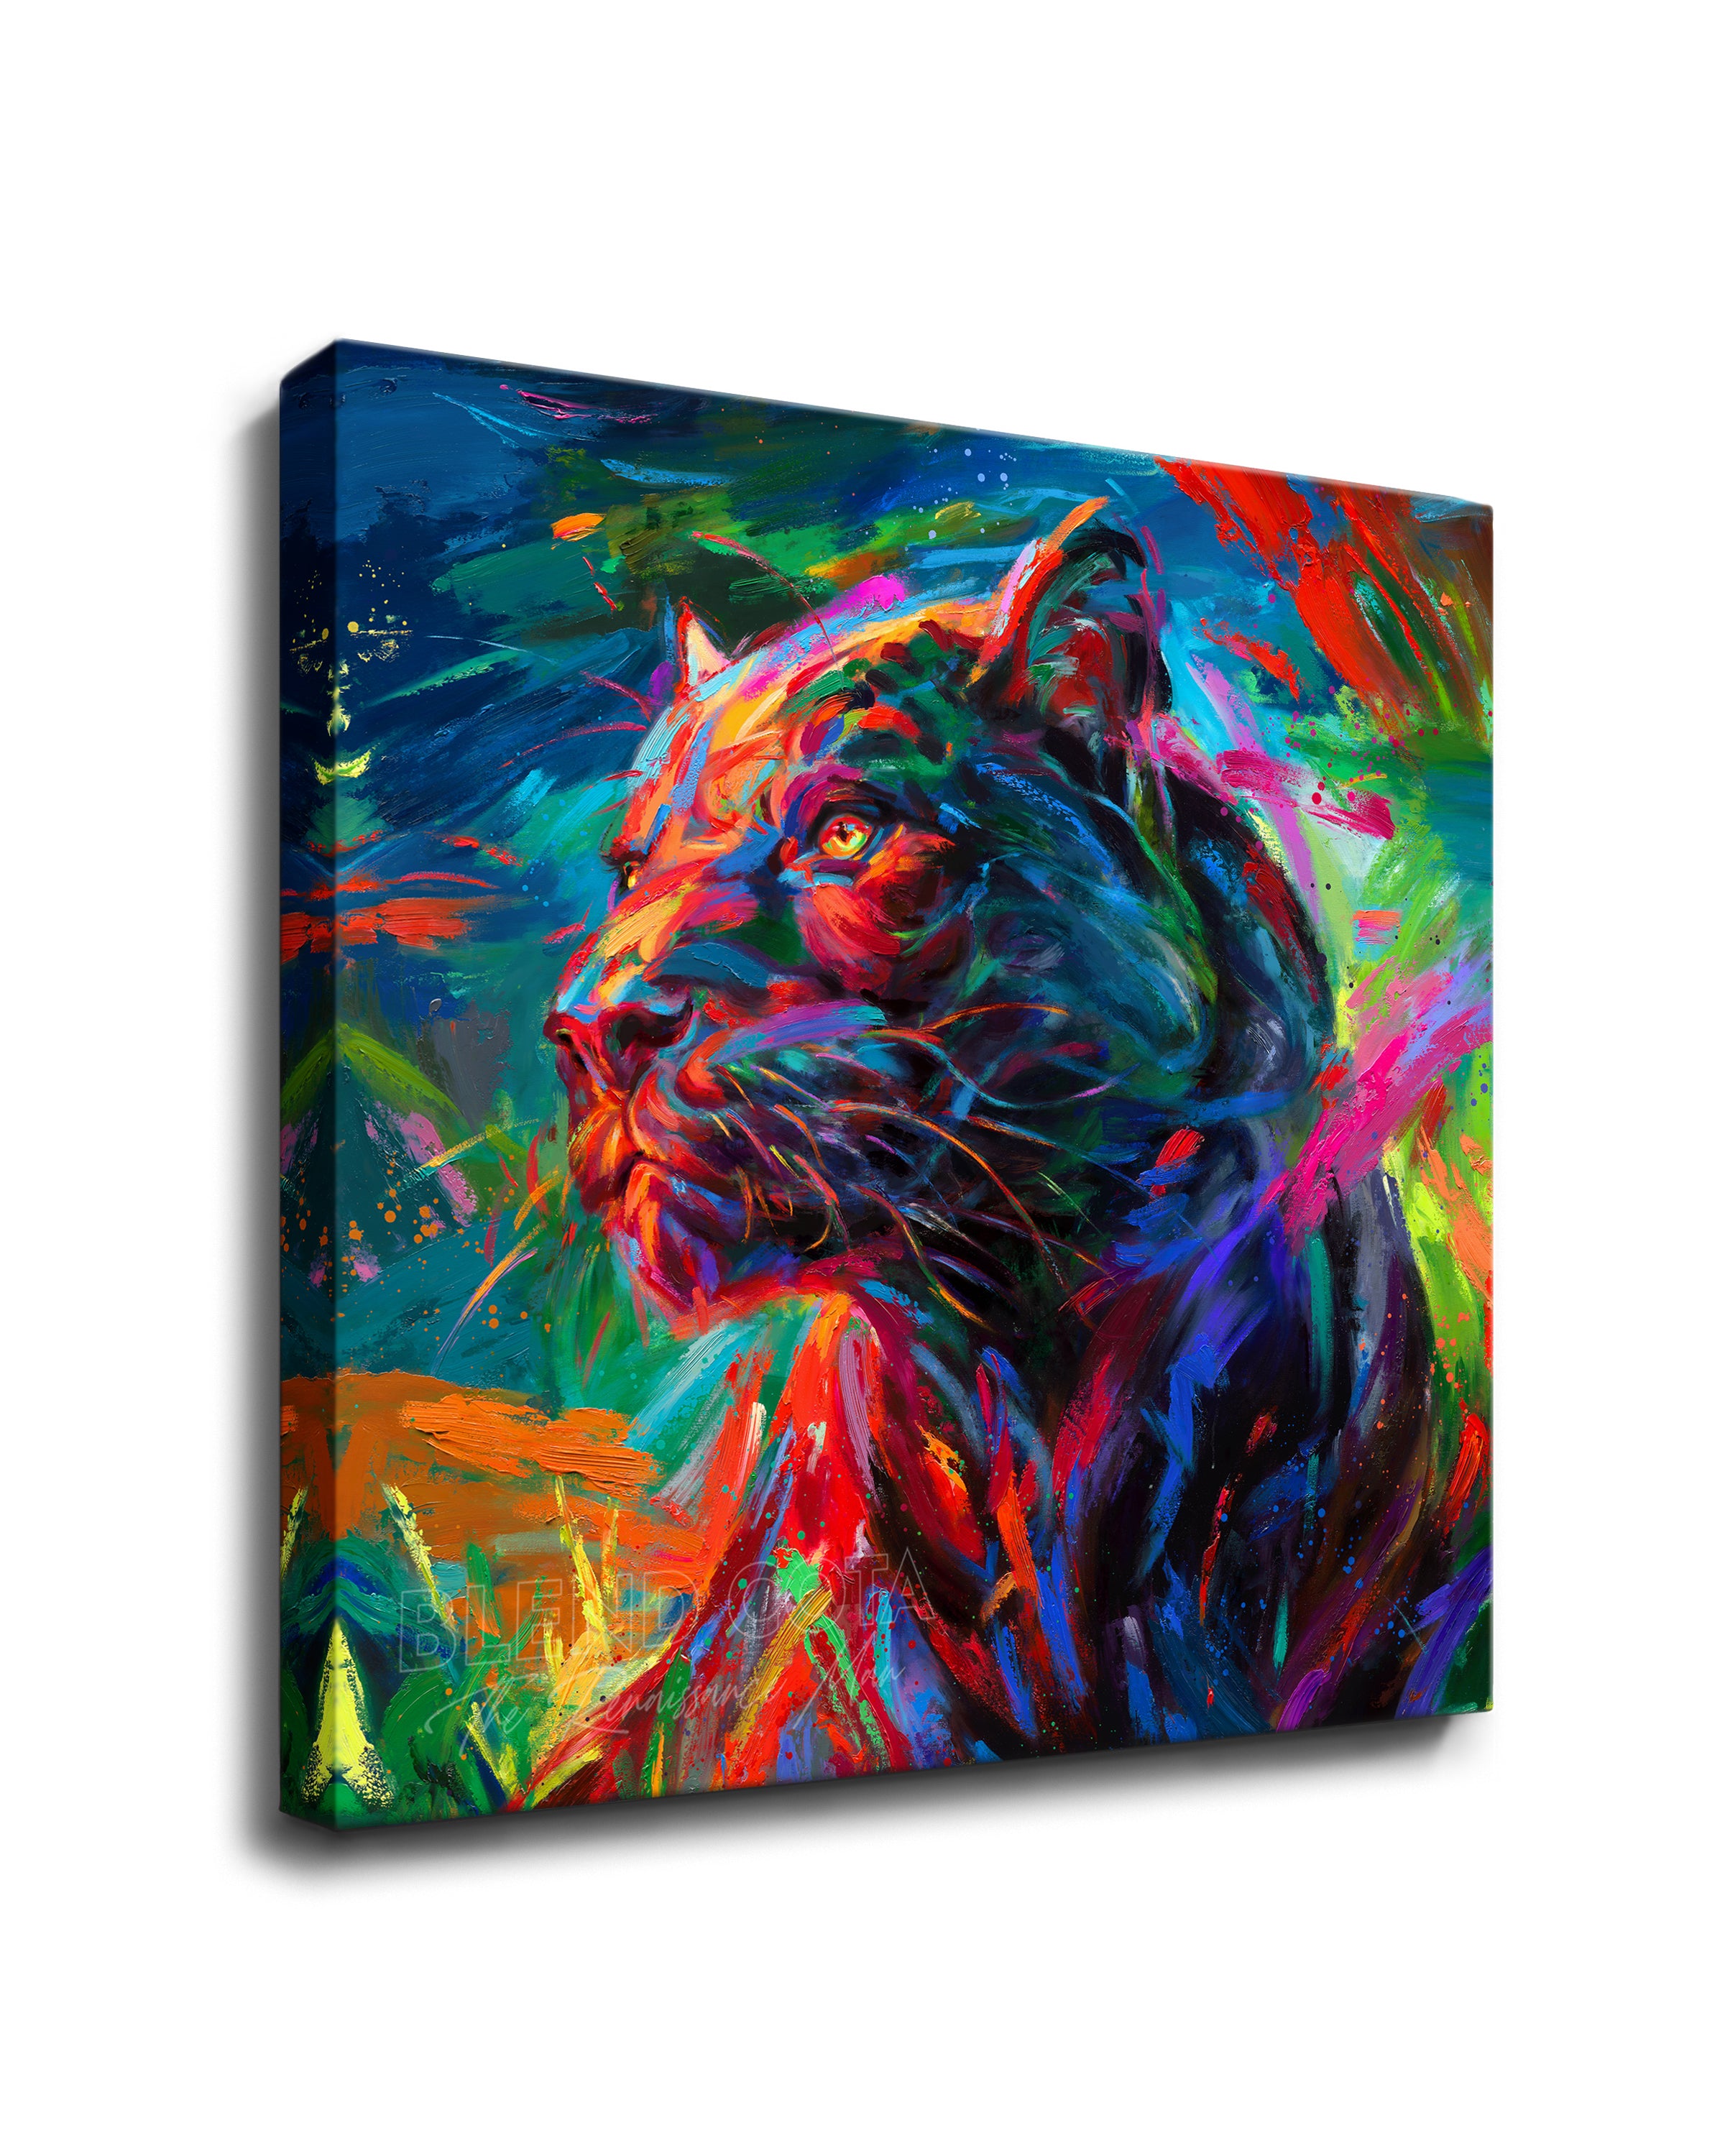 
                  
                    Square format Gallery wrapped art print on canvas of the black panther stalking its prey through the long night painted with colorful brushstrokes in an expressionistic style.
                  
                